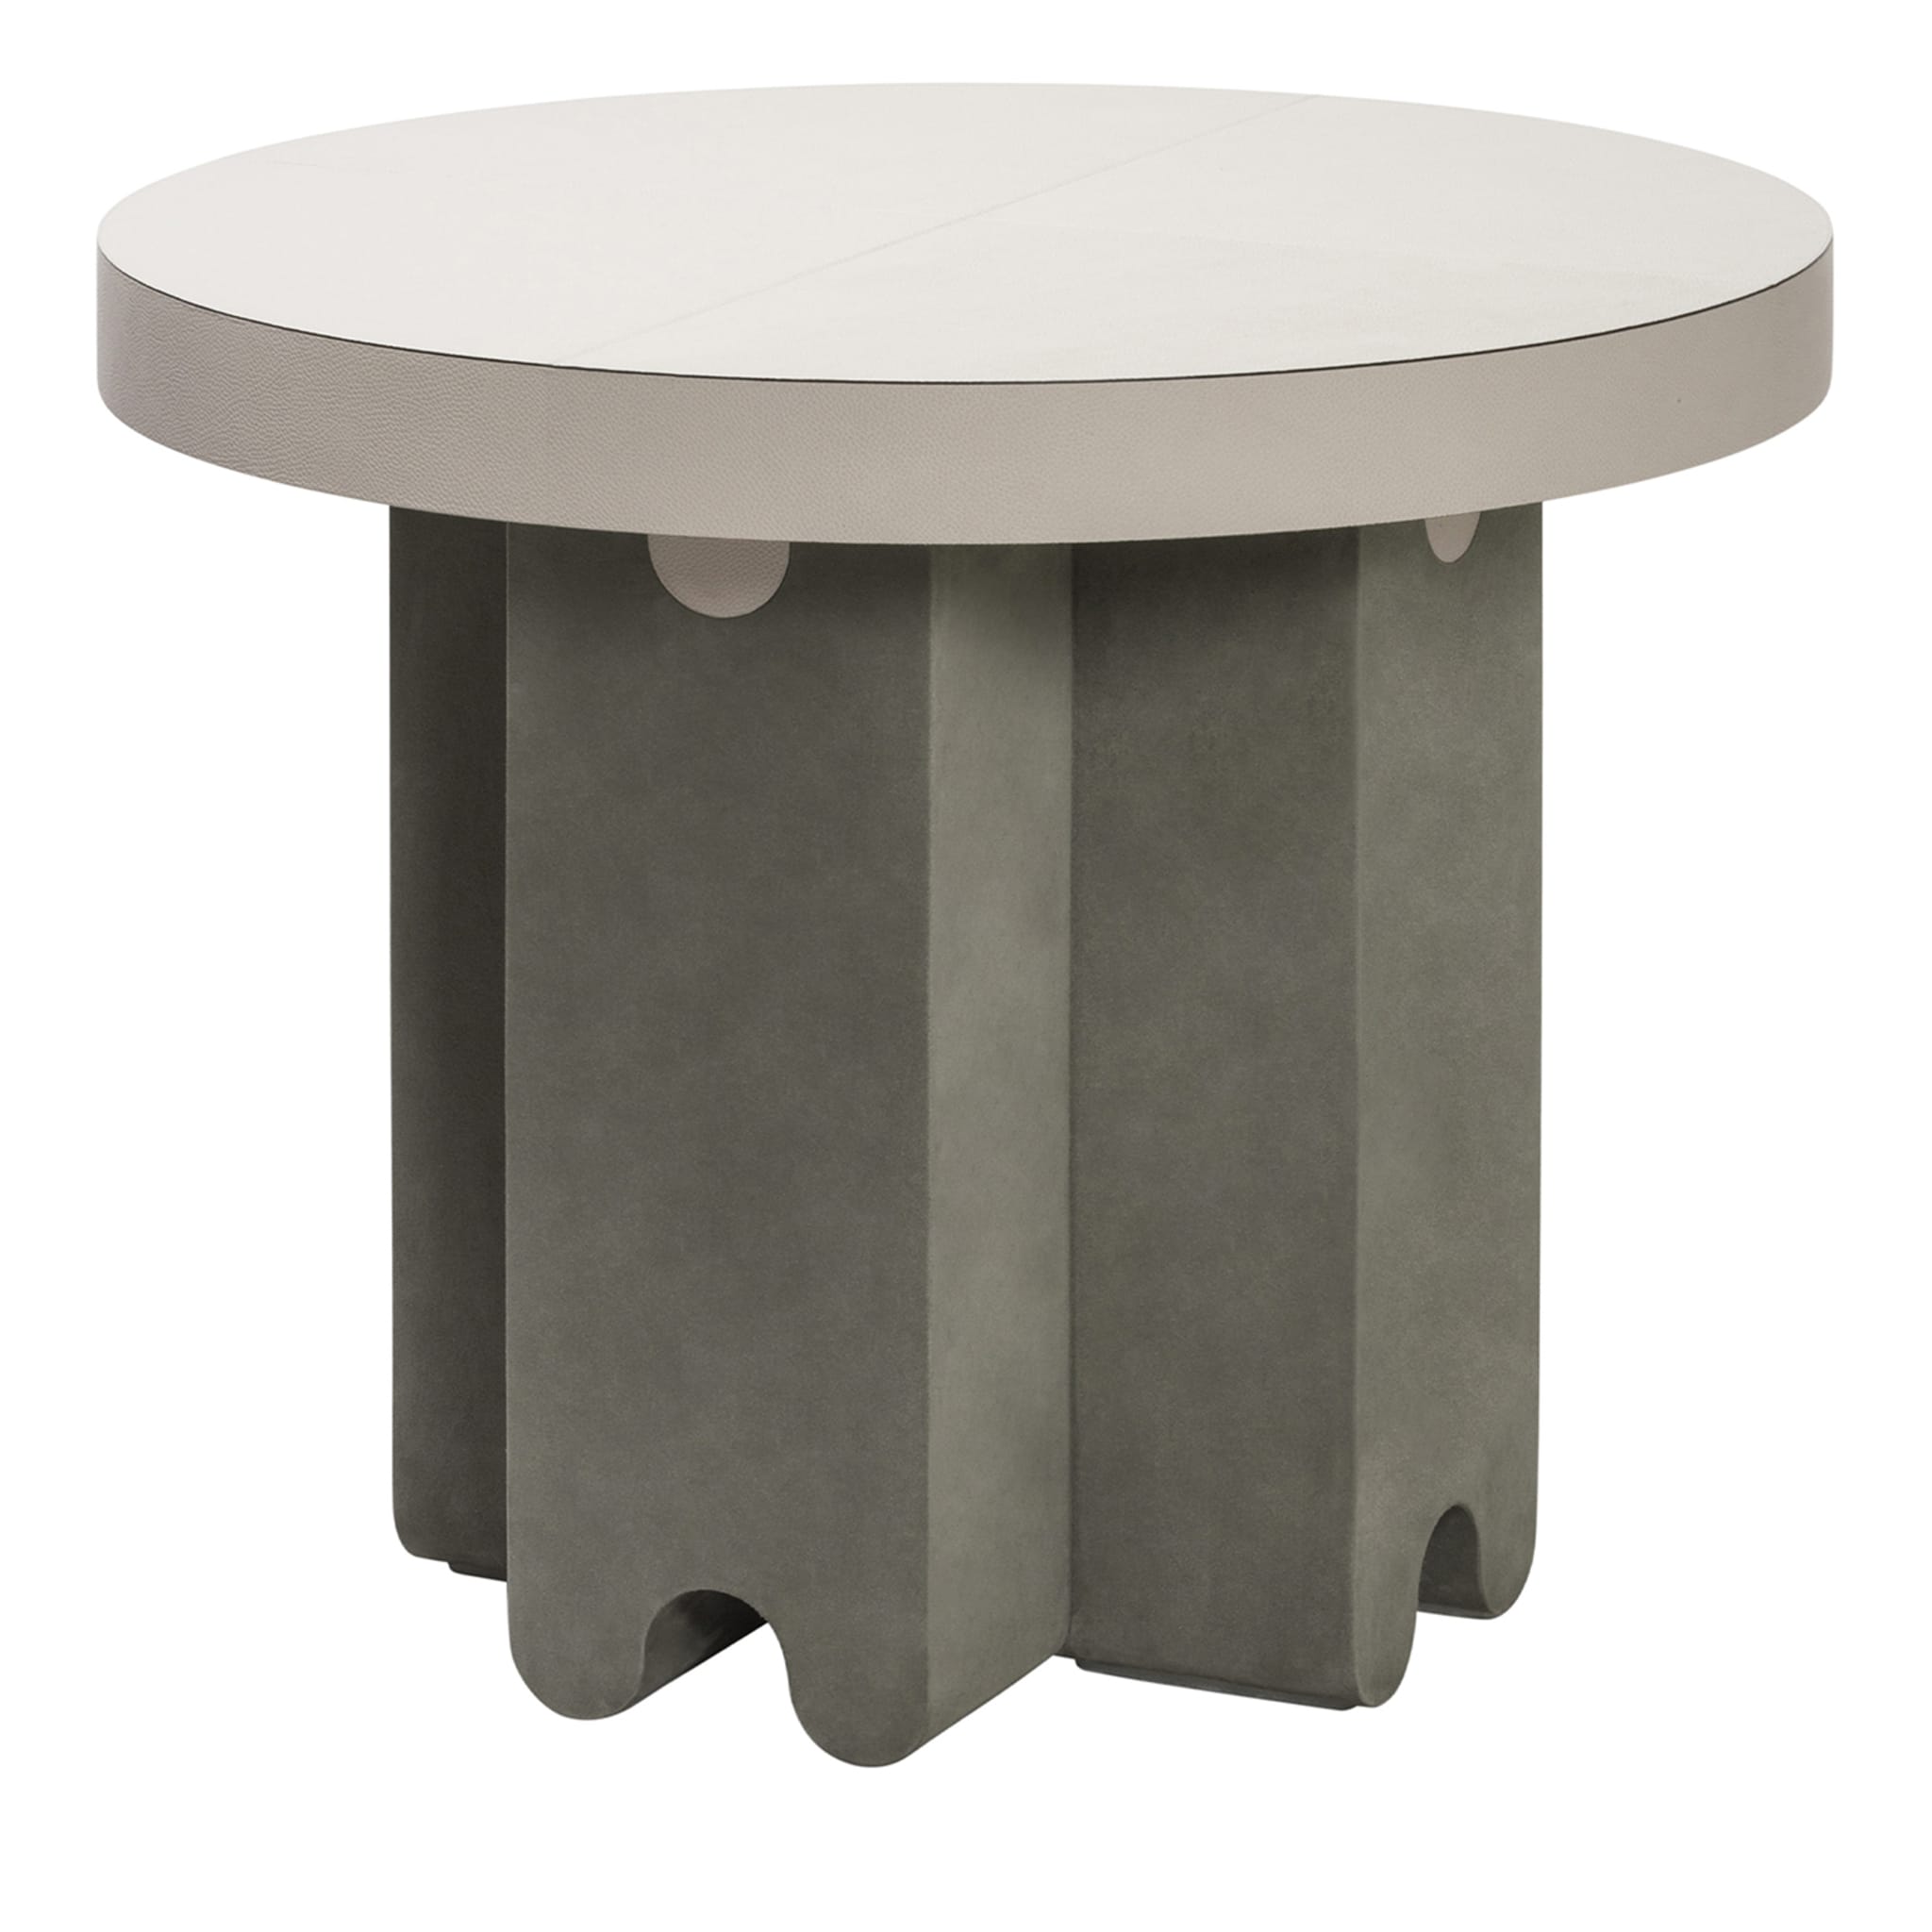 Table d'appoint ronde en cuir Ossicle - Vue principale